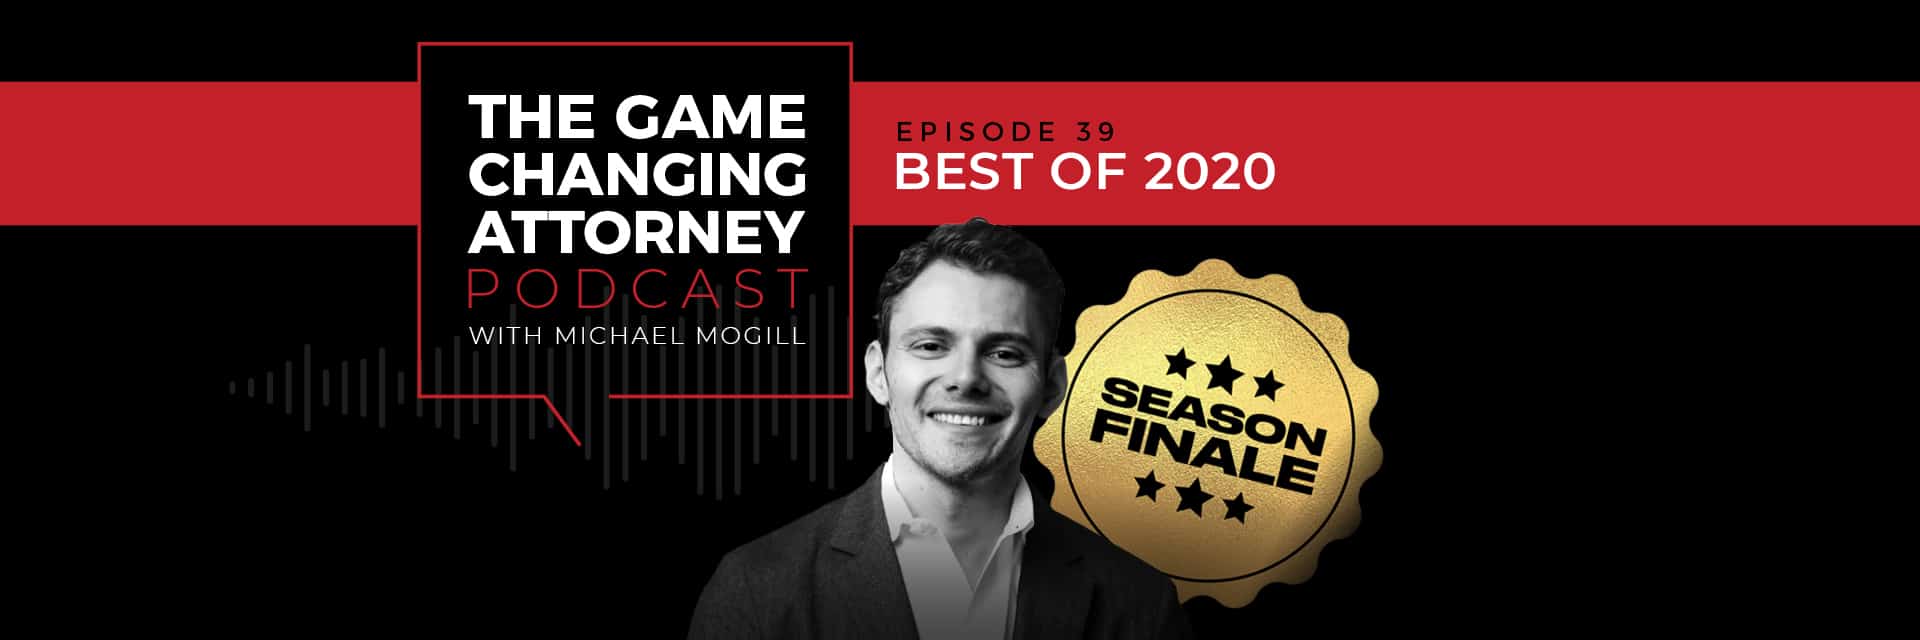 Best of 2020 - The Game Changing Attorney Podcast - Desktop